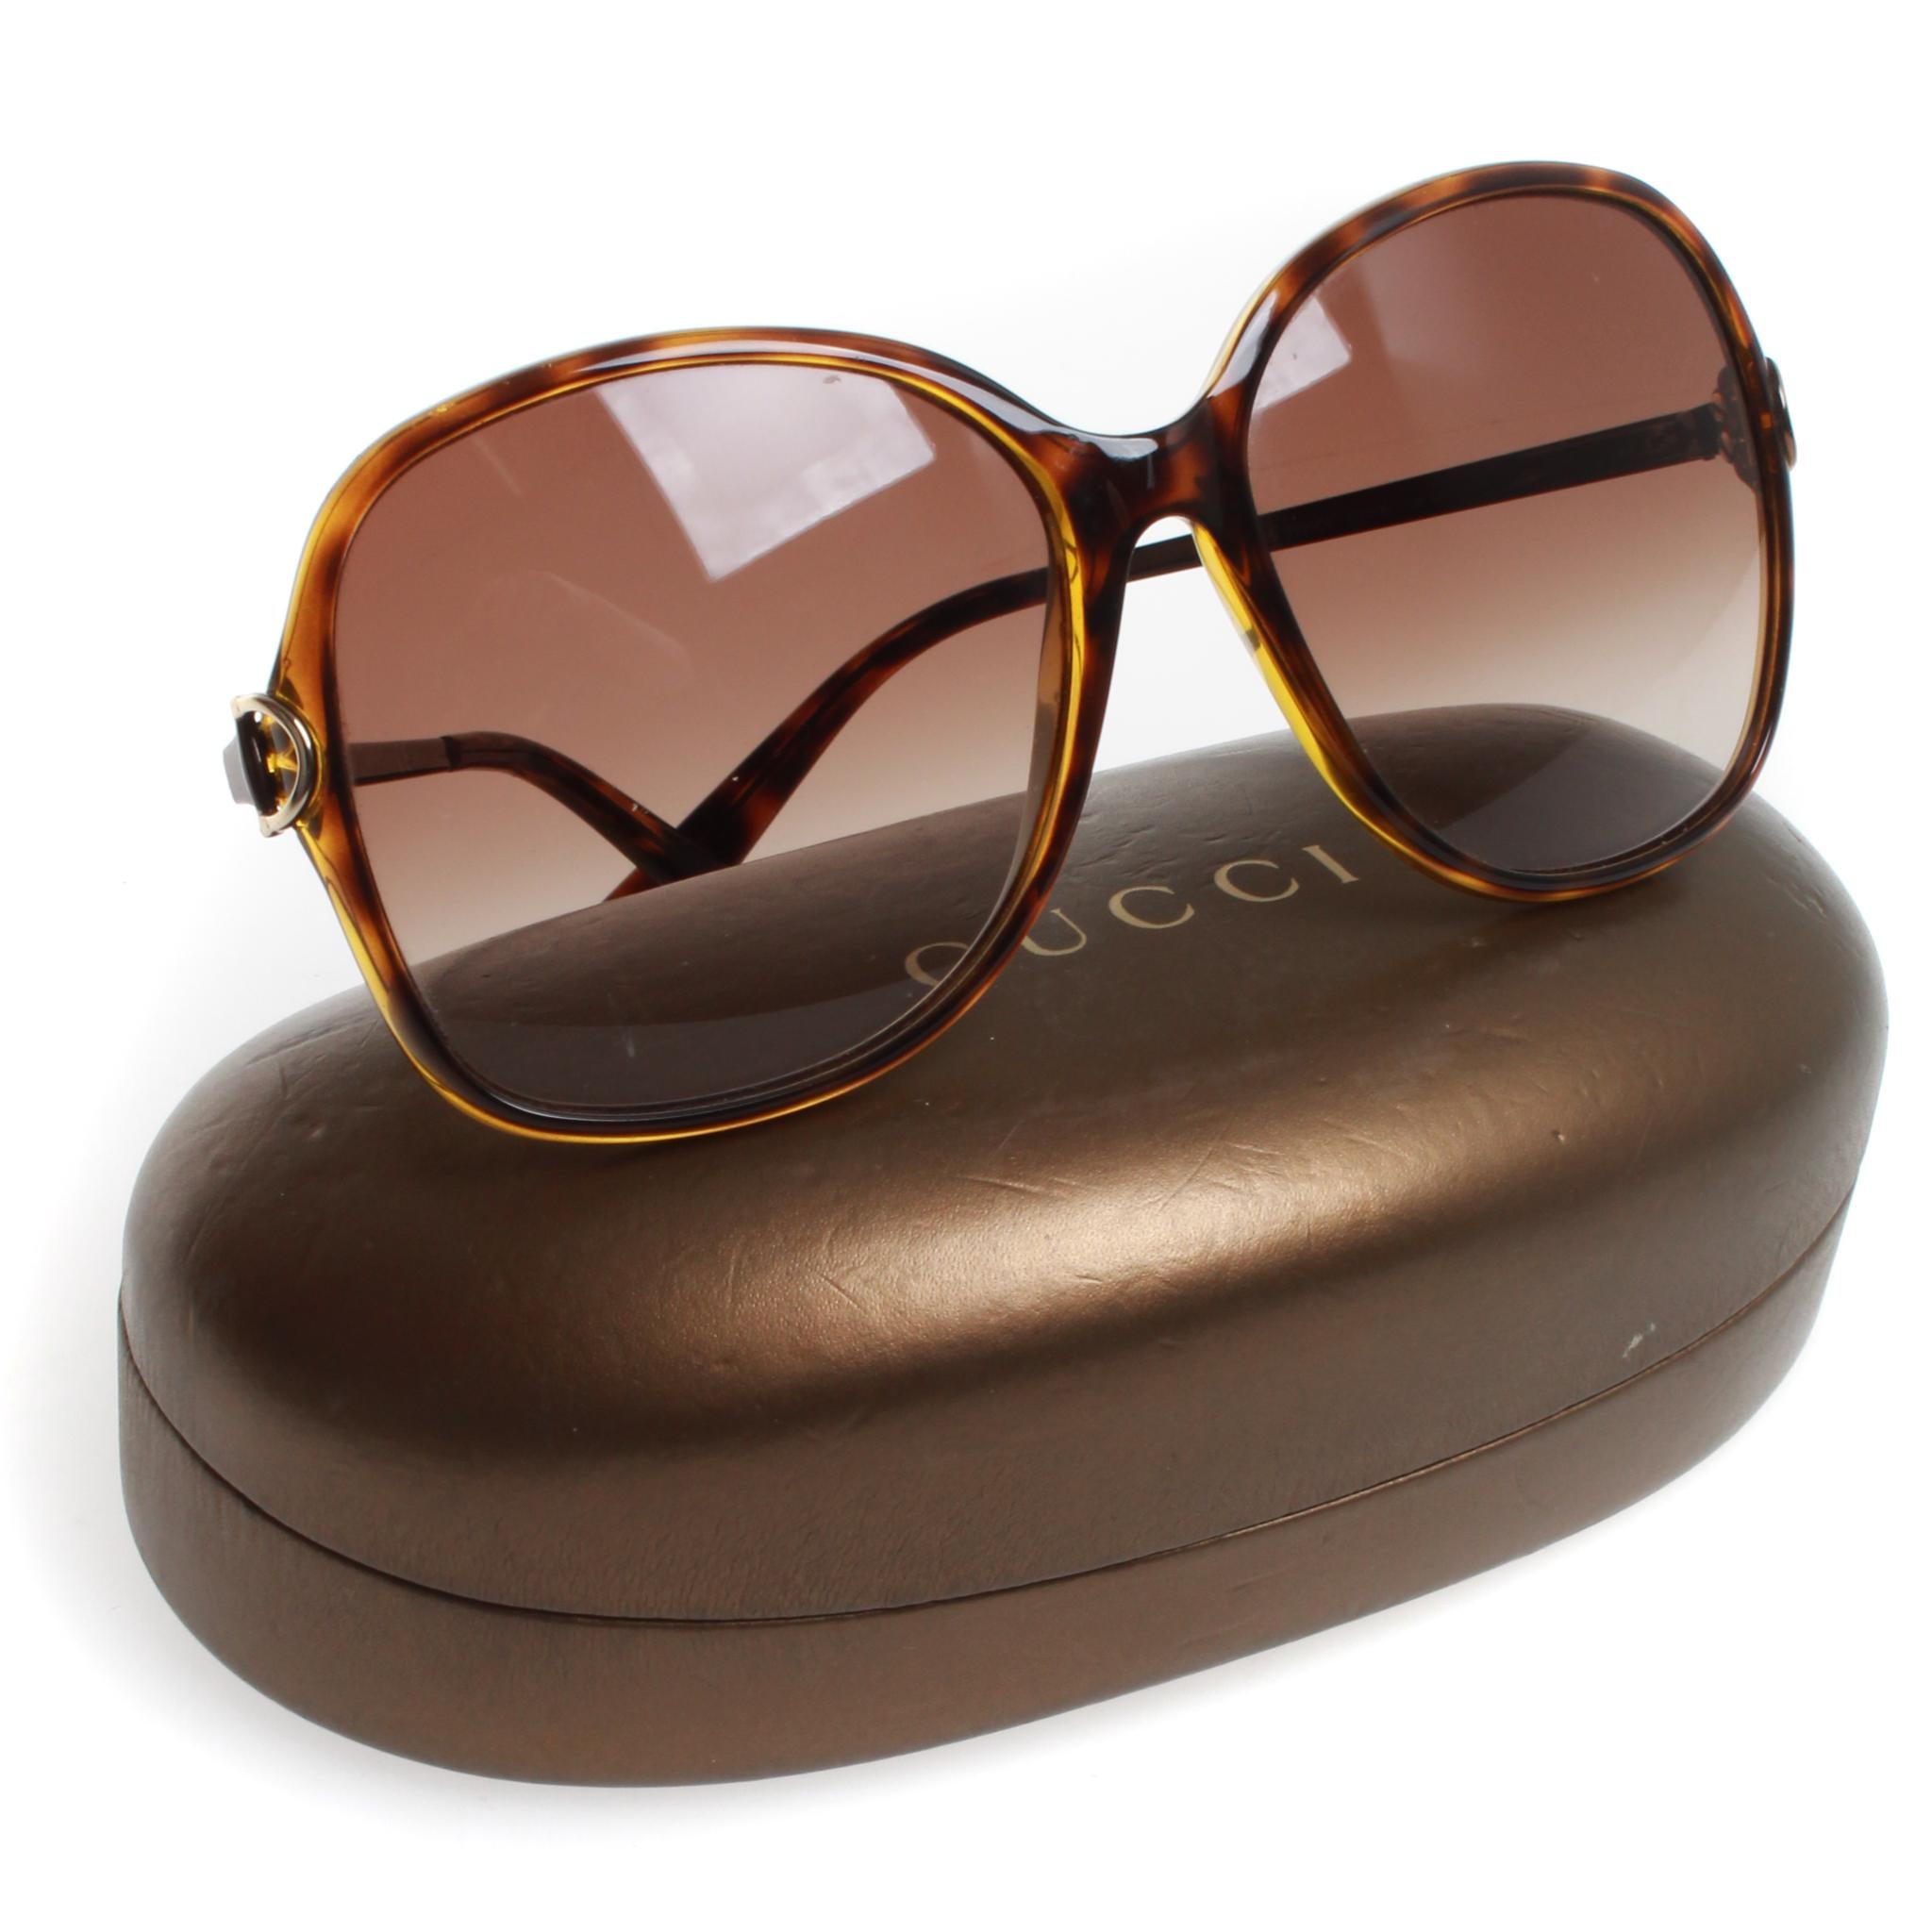 Gucci sunglasses, Tortoiseshell with hints of green with box and case